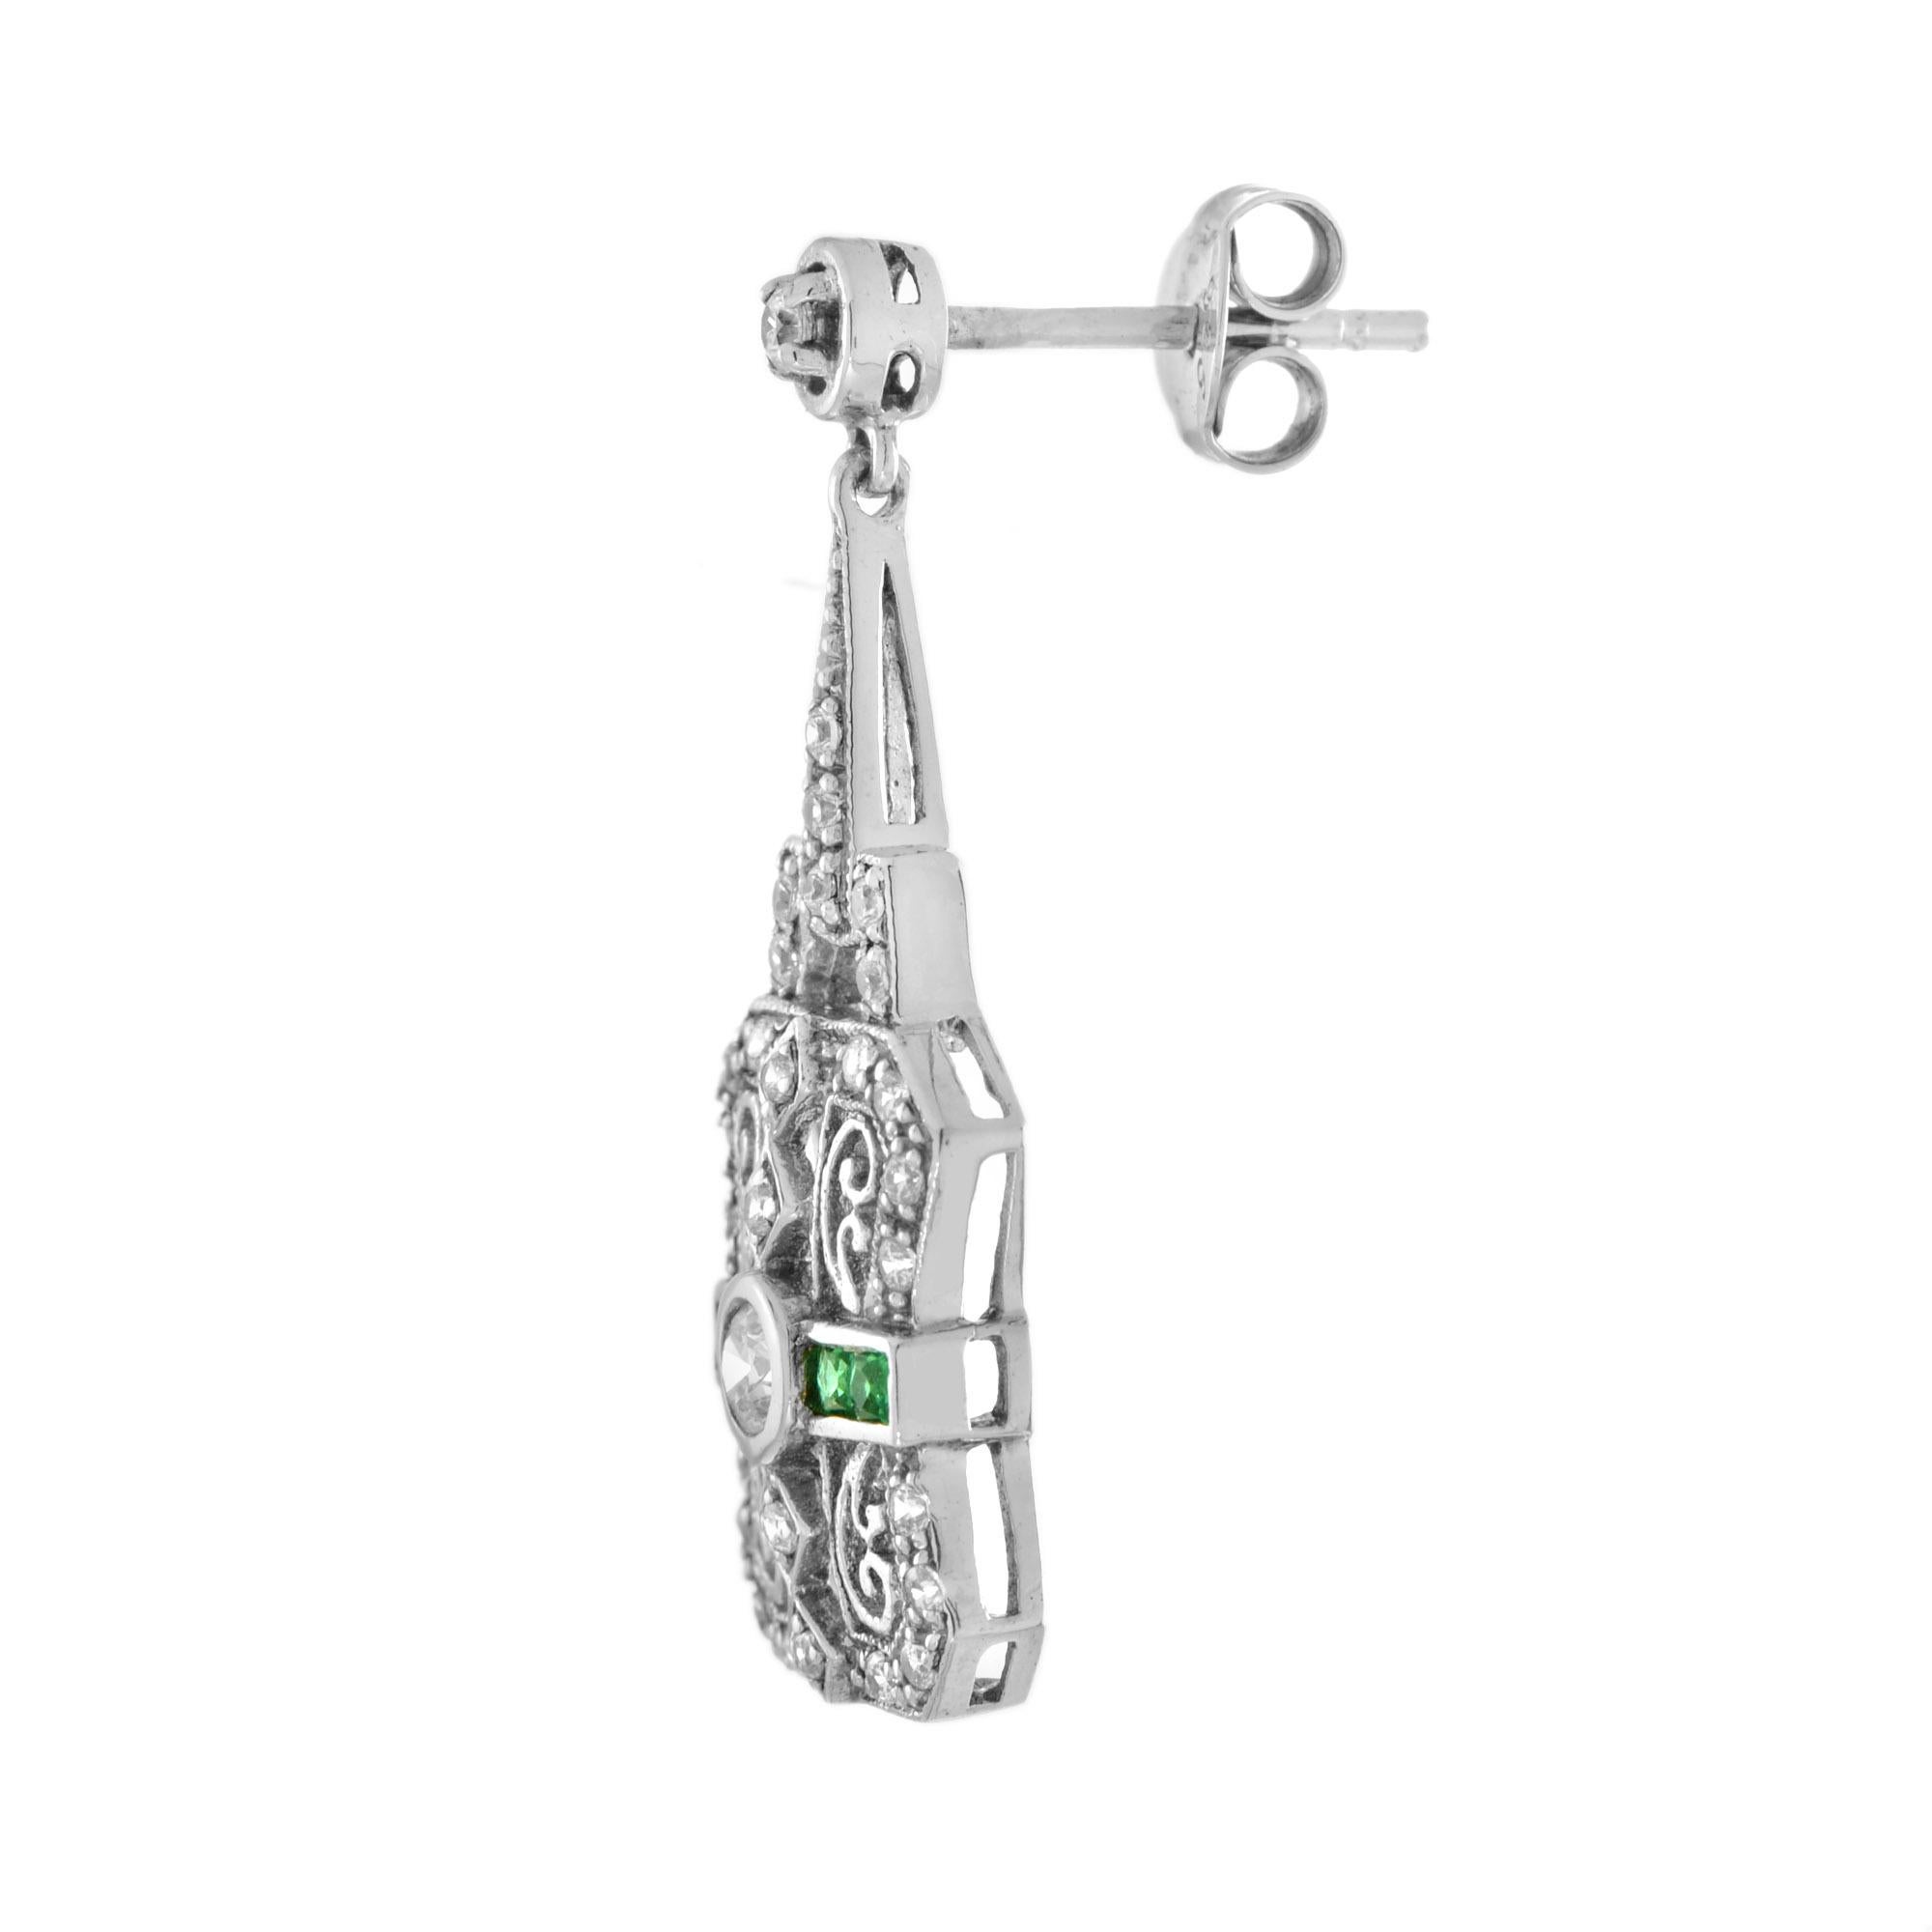 An Art Deco-inspired diamond and emerald white gold filigree drop earrings. Featuring one round brilliant cut diamond of approximately 0.17 carat each, graded H color, SI clarity. Accented by 4 French-cut emeralds and 31 round-cut diamonds on each